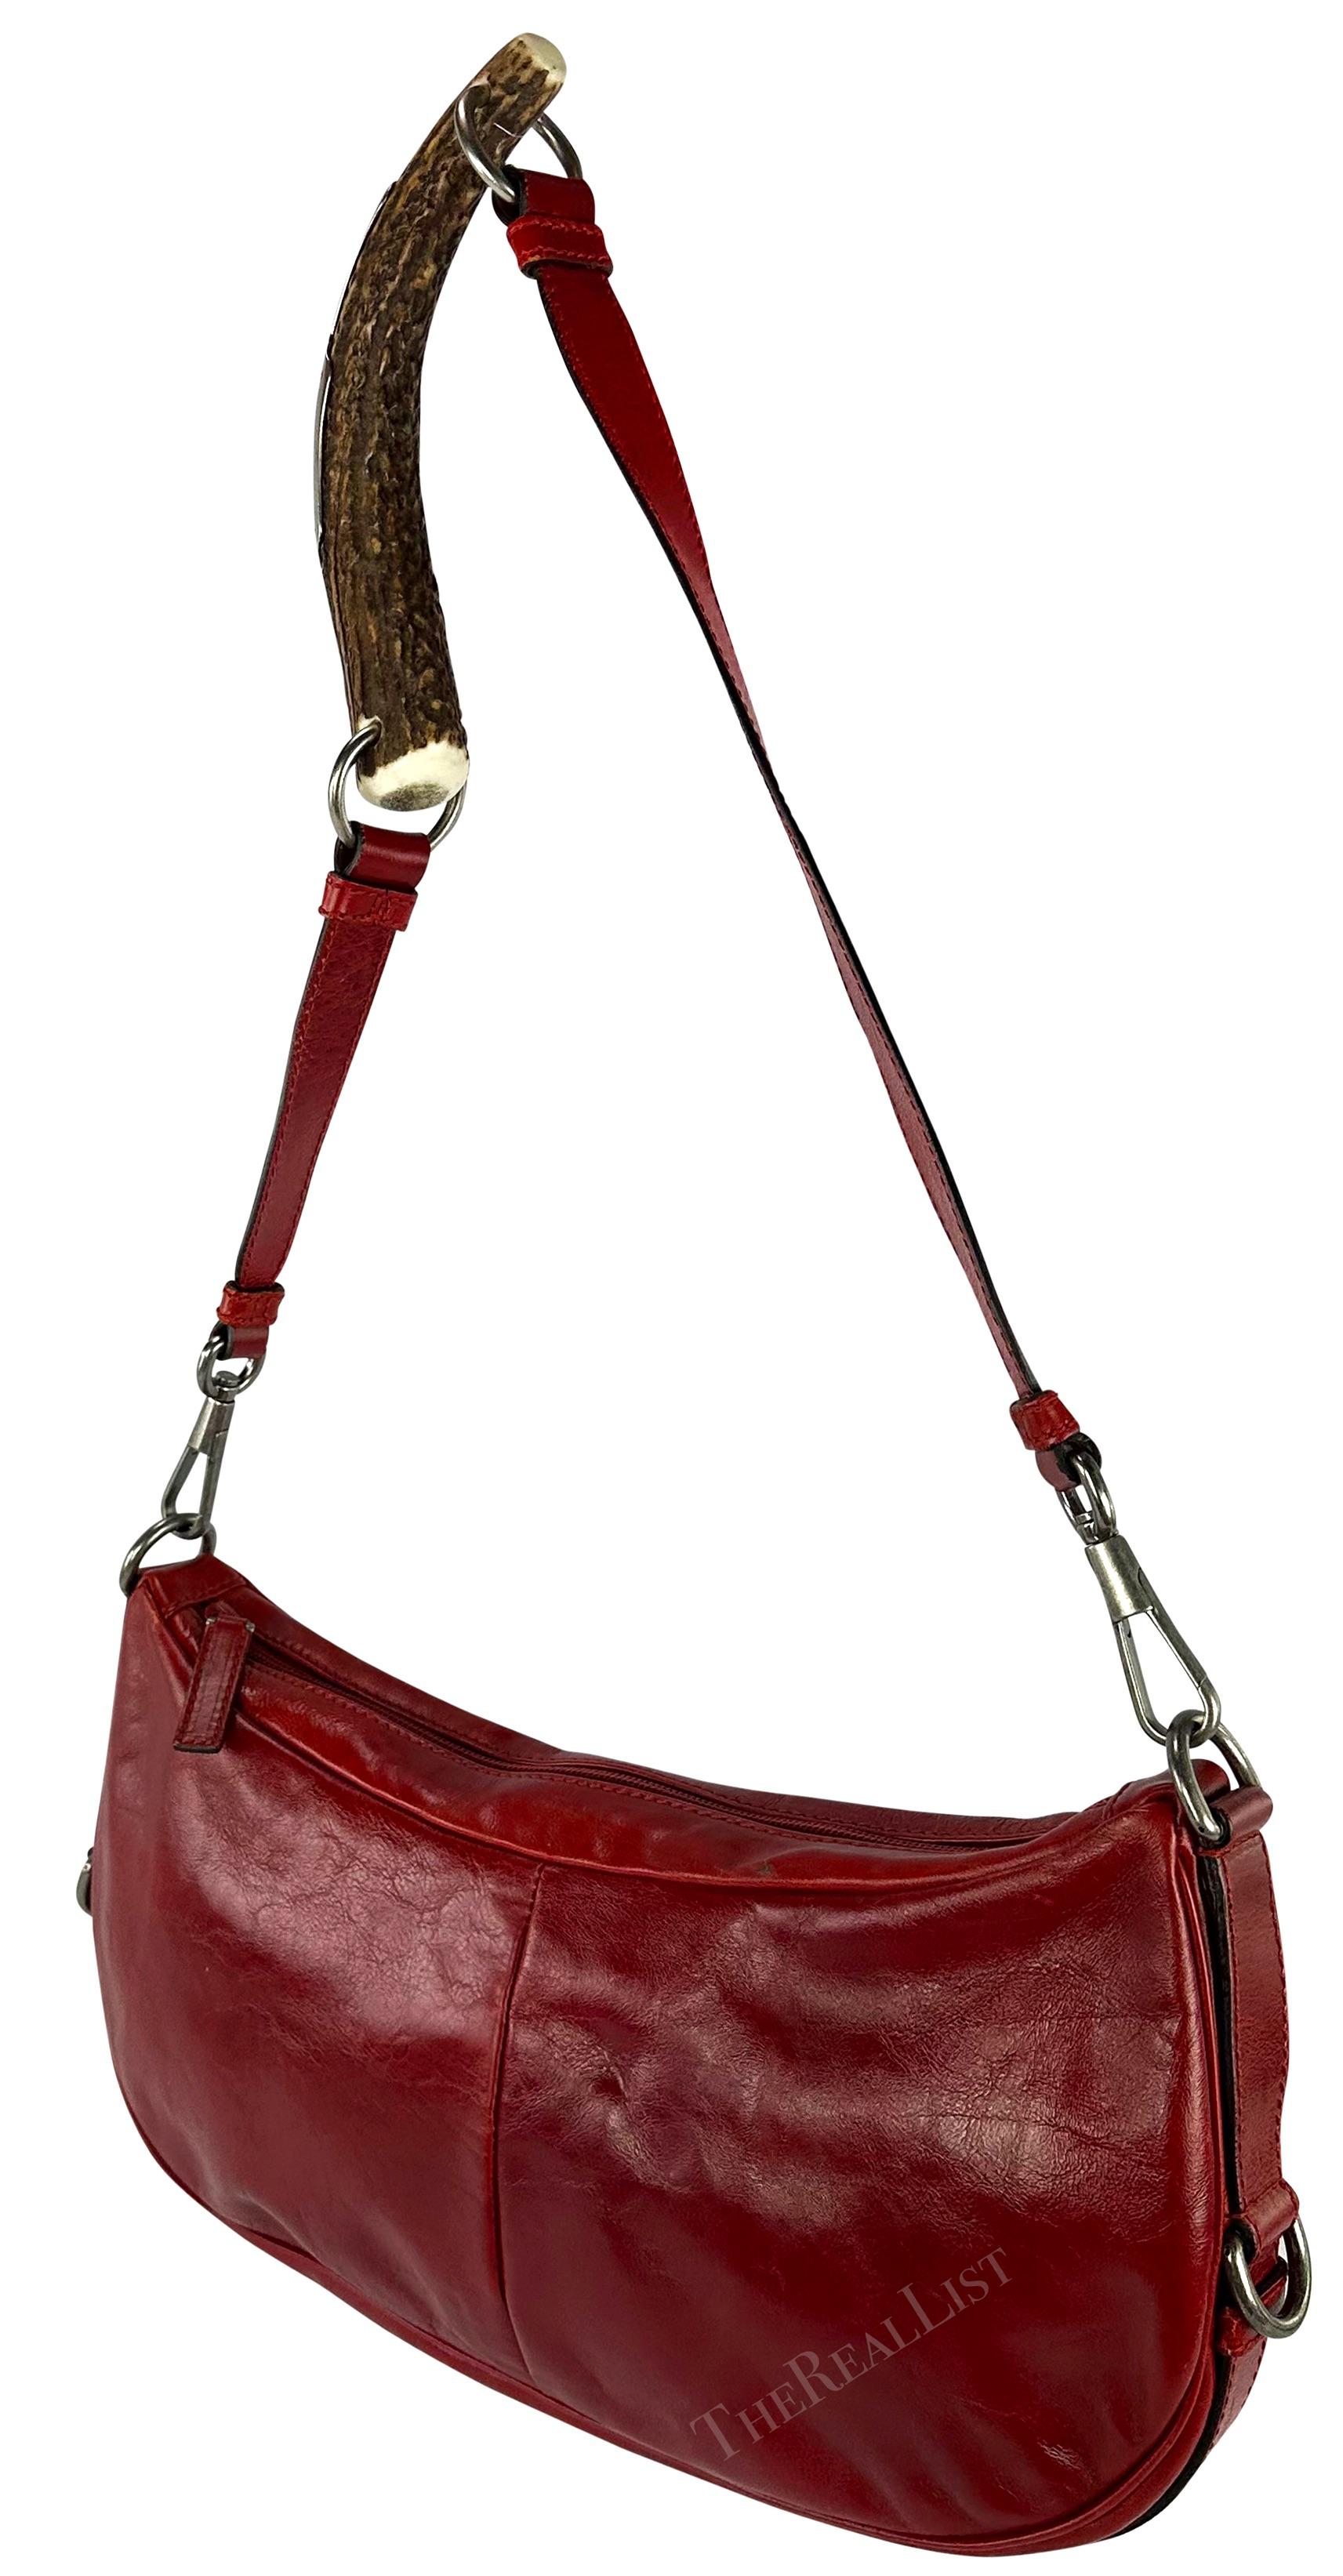 2000s Yves Saint Laurent by Tom Ford Red Leather Mombassa Shoulder Bag For Sale 4